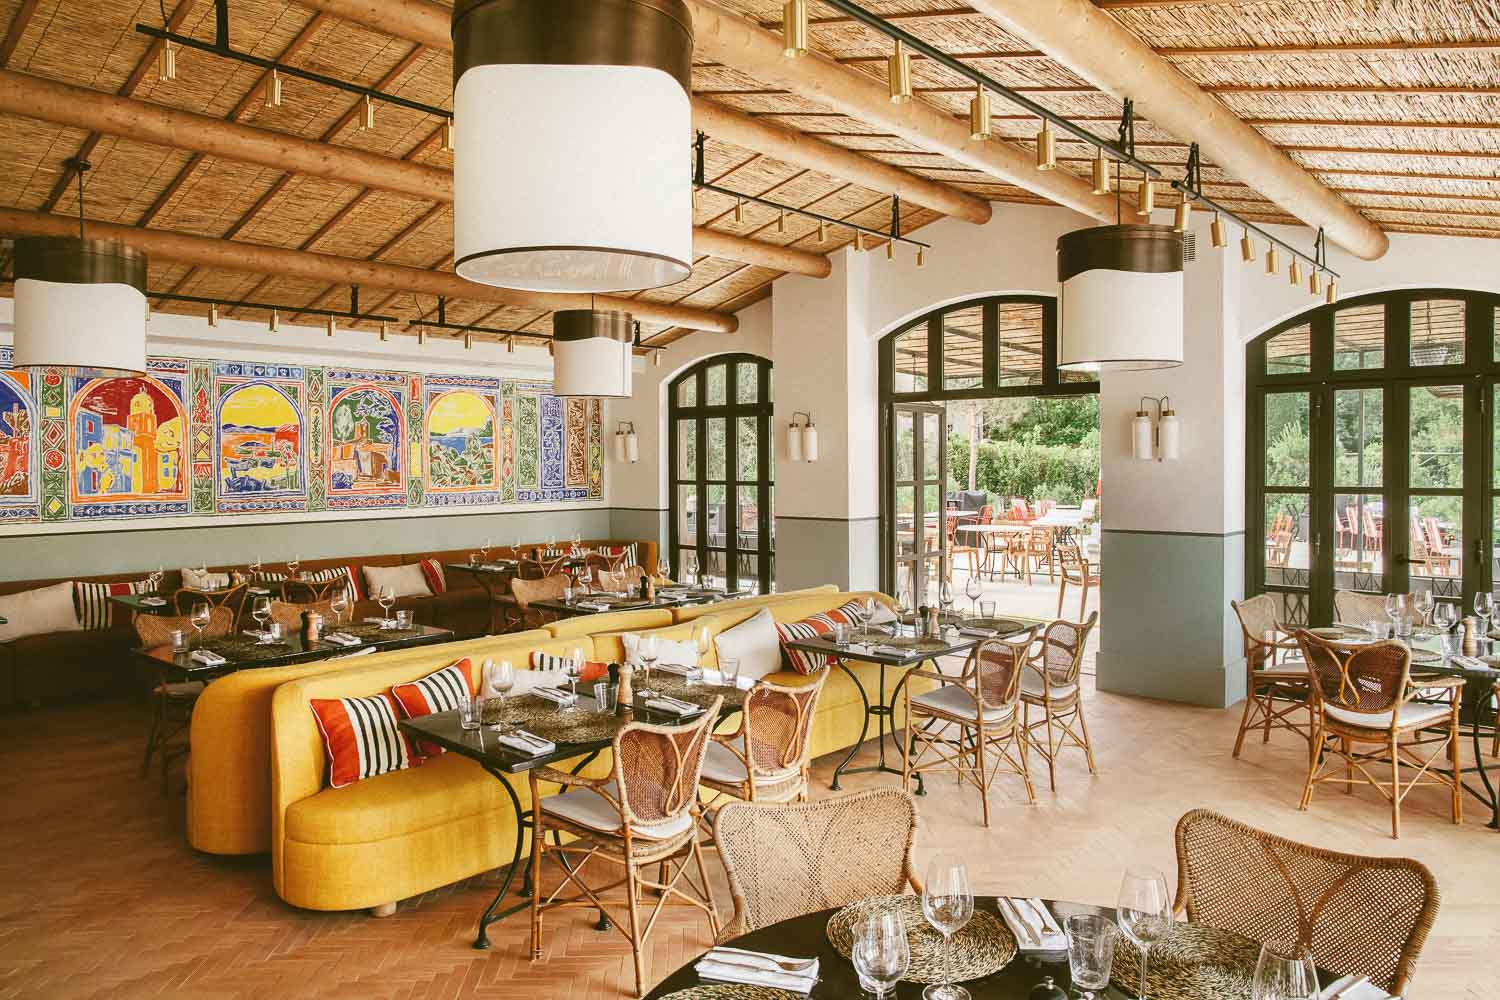 Lou Pinet Obsessed with the retro-bohemian restaurant design